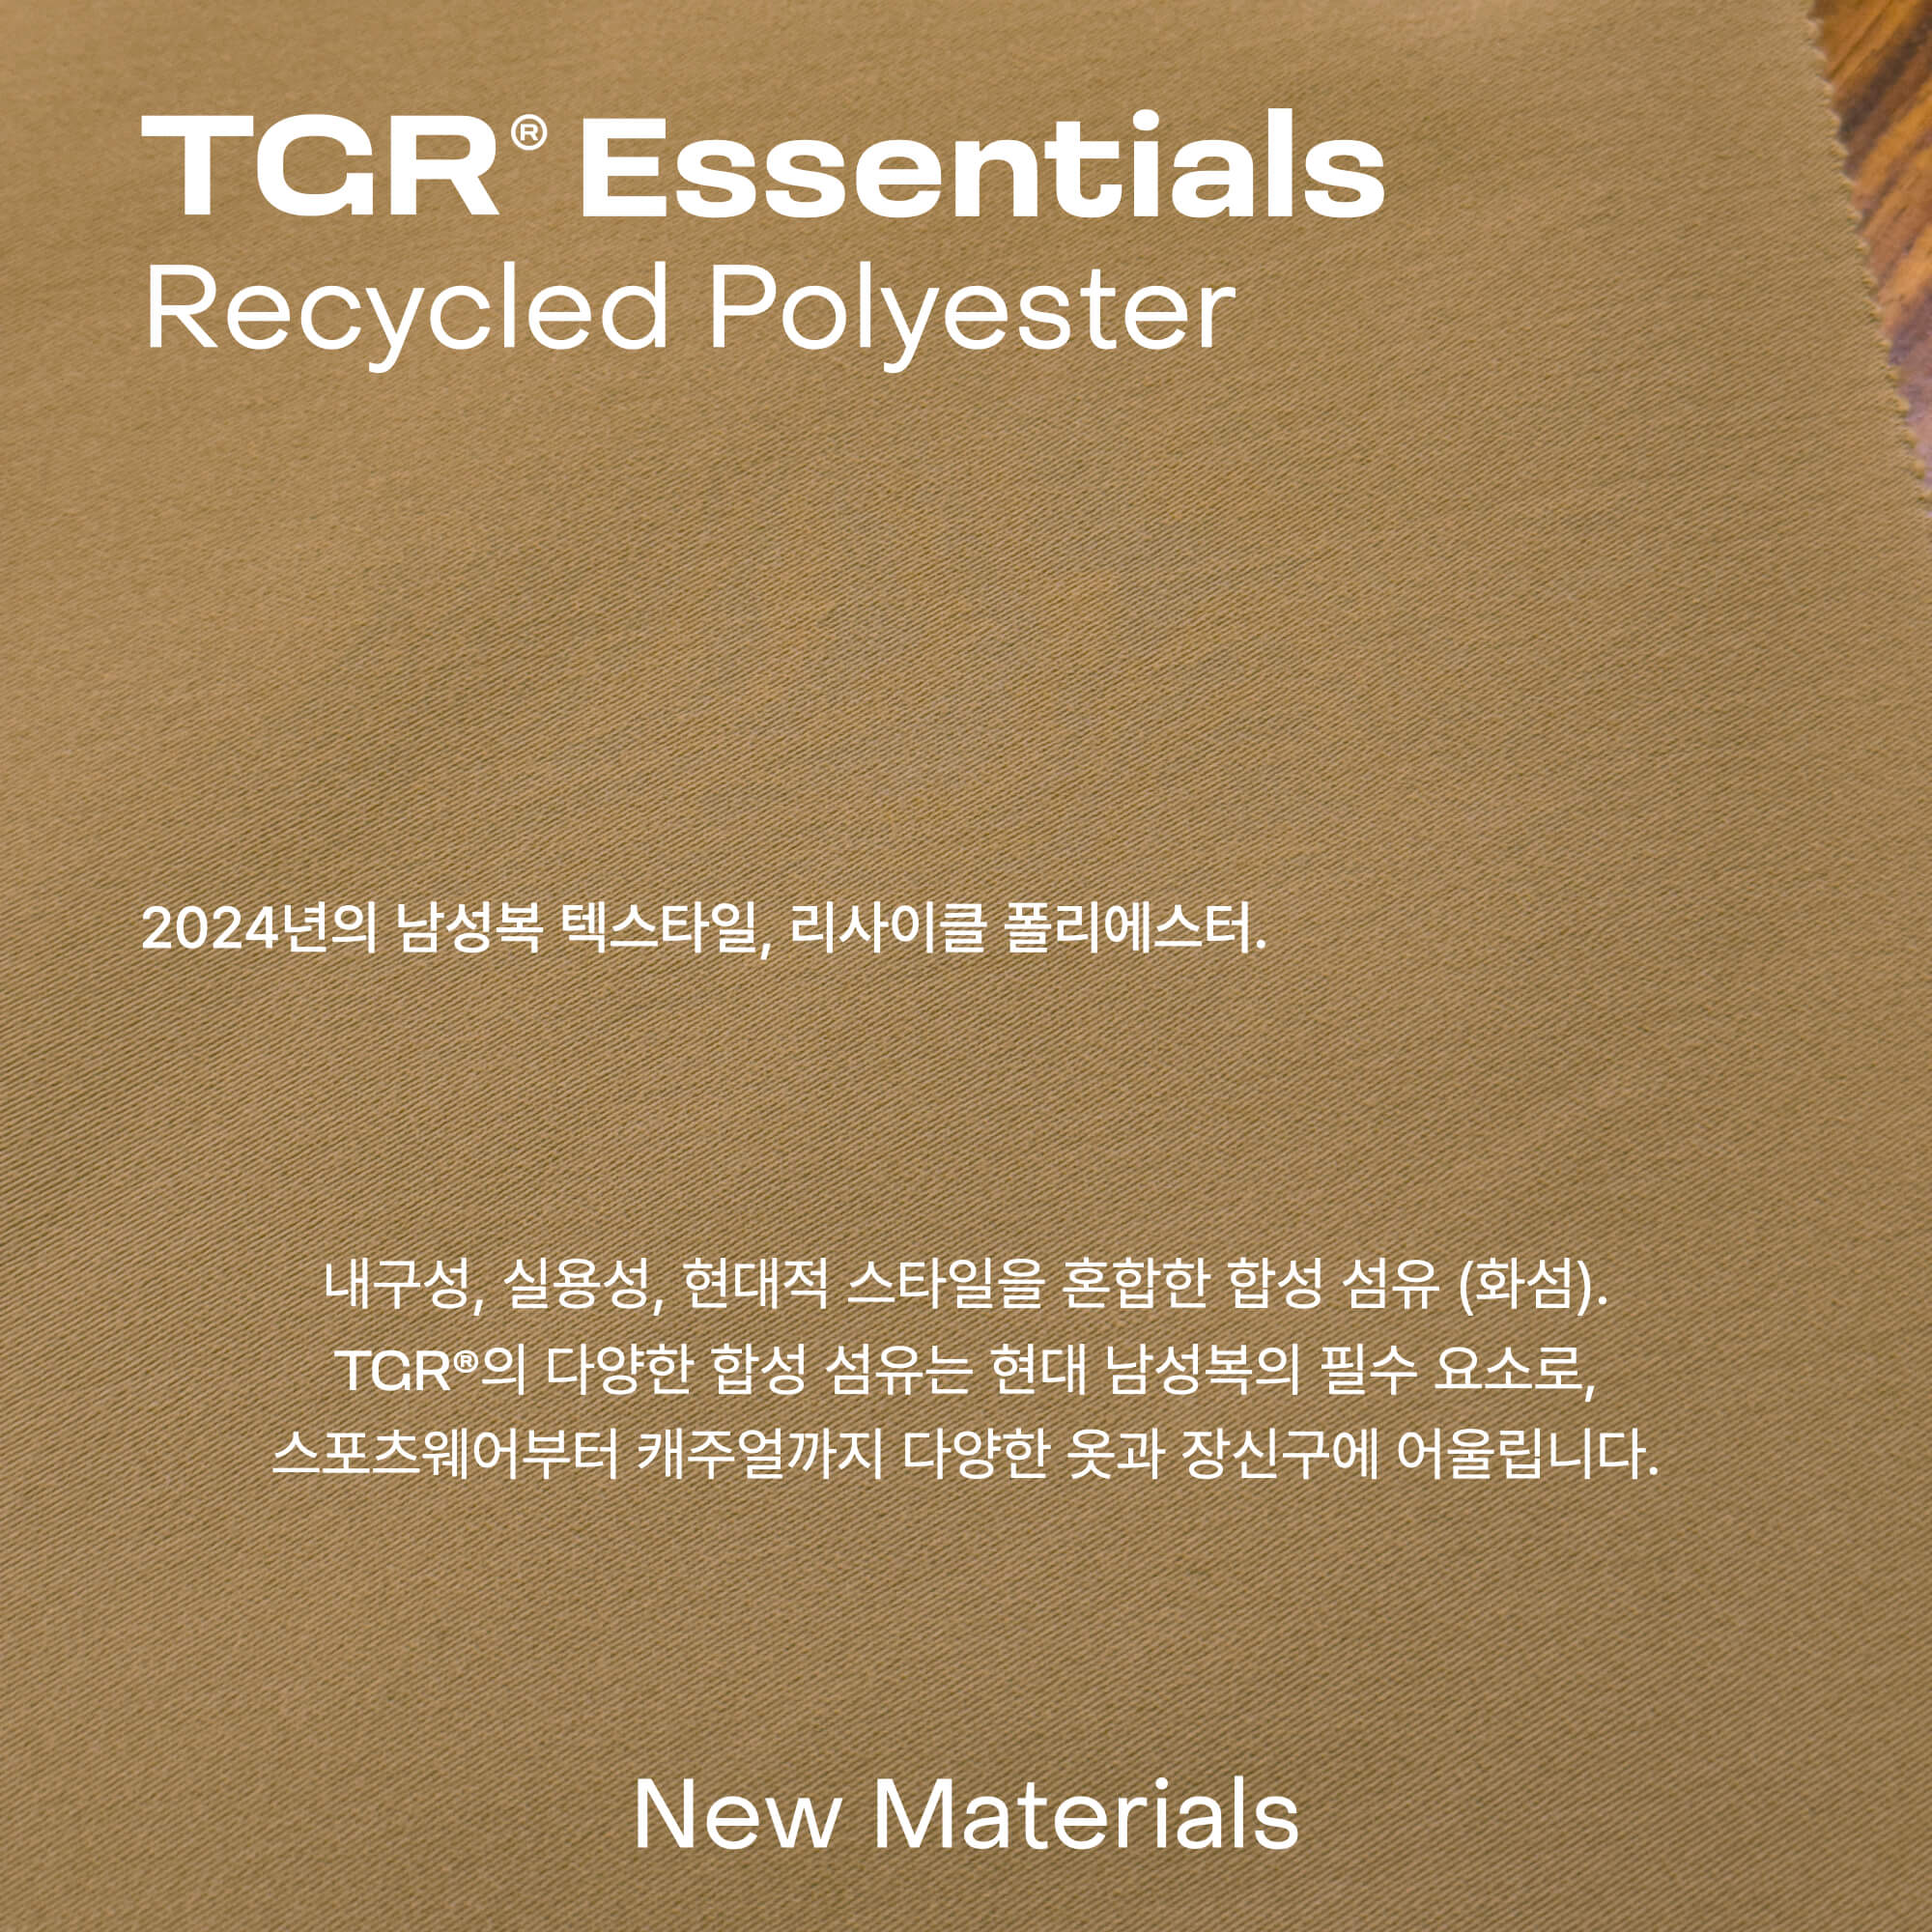 TGR® Essentials - Recycled Polyester